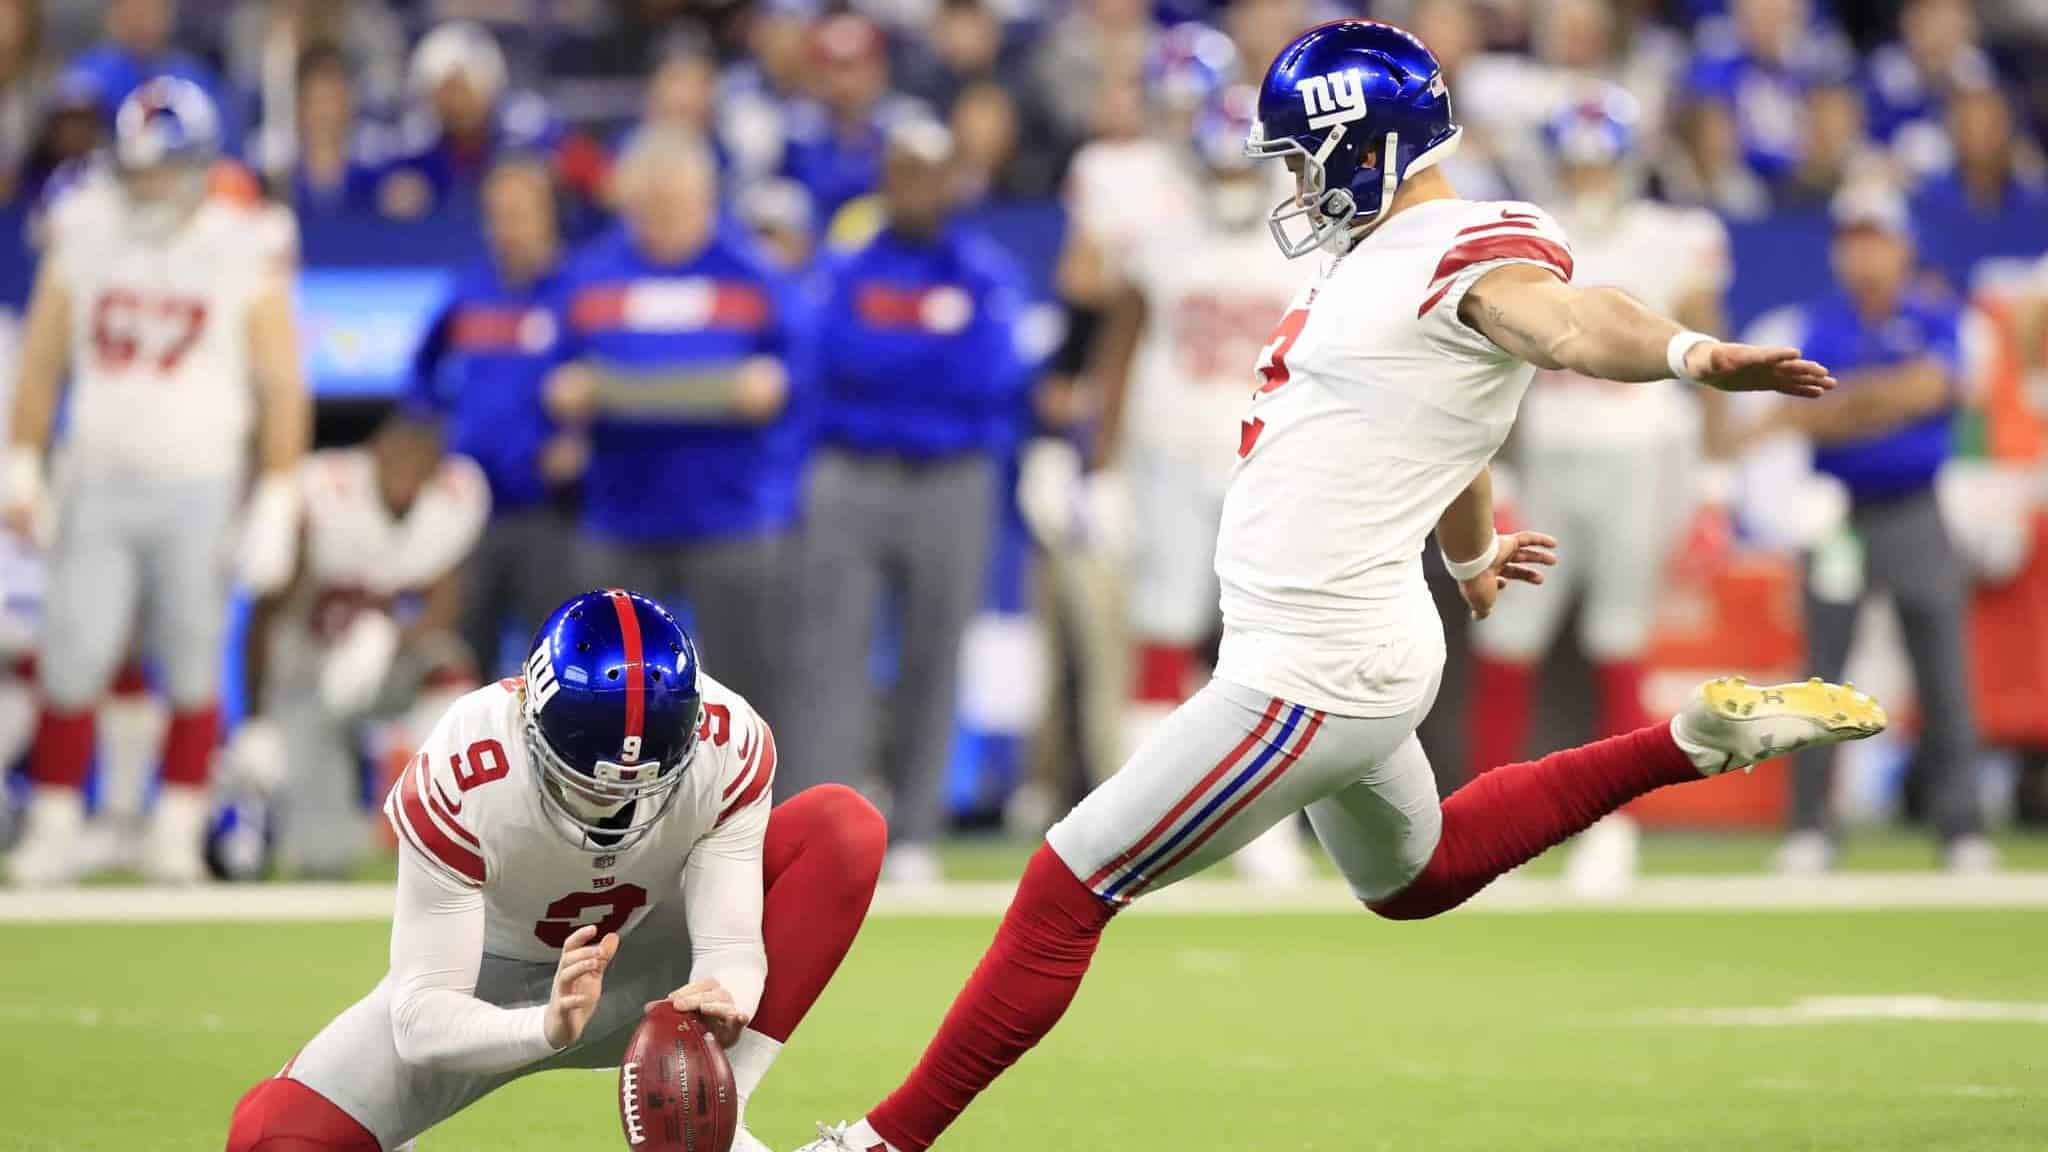 INDIANAPOLIS, INDIANA - DECEMBER 23: Aldrick Rosas #2 of the New York Giants kicks a field goal in the game against the Indianapolis Colts in the second quarter at Lucas Oil Stadium on December 23, 2018 in Indianapolis, Indiana.